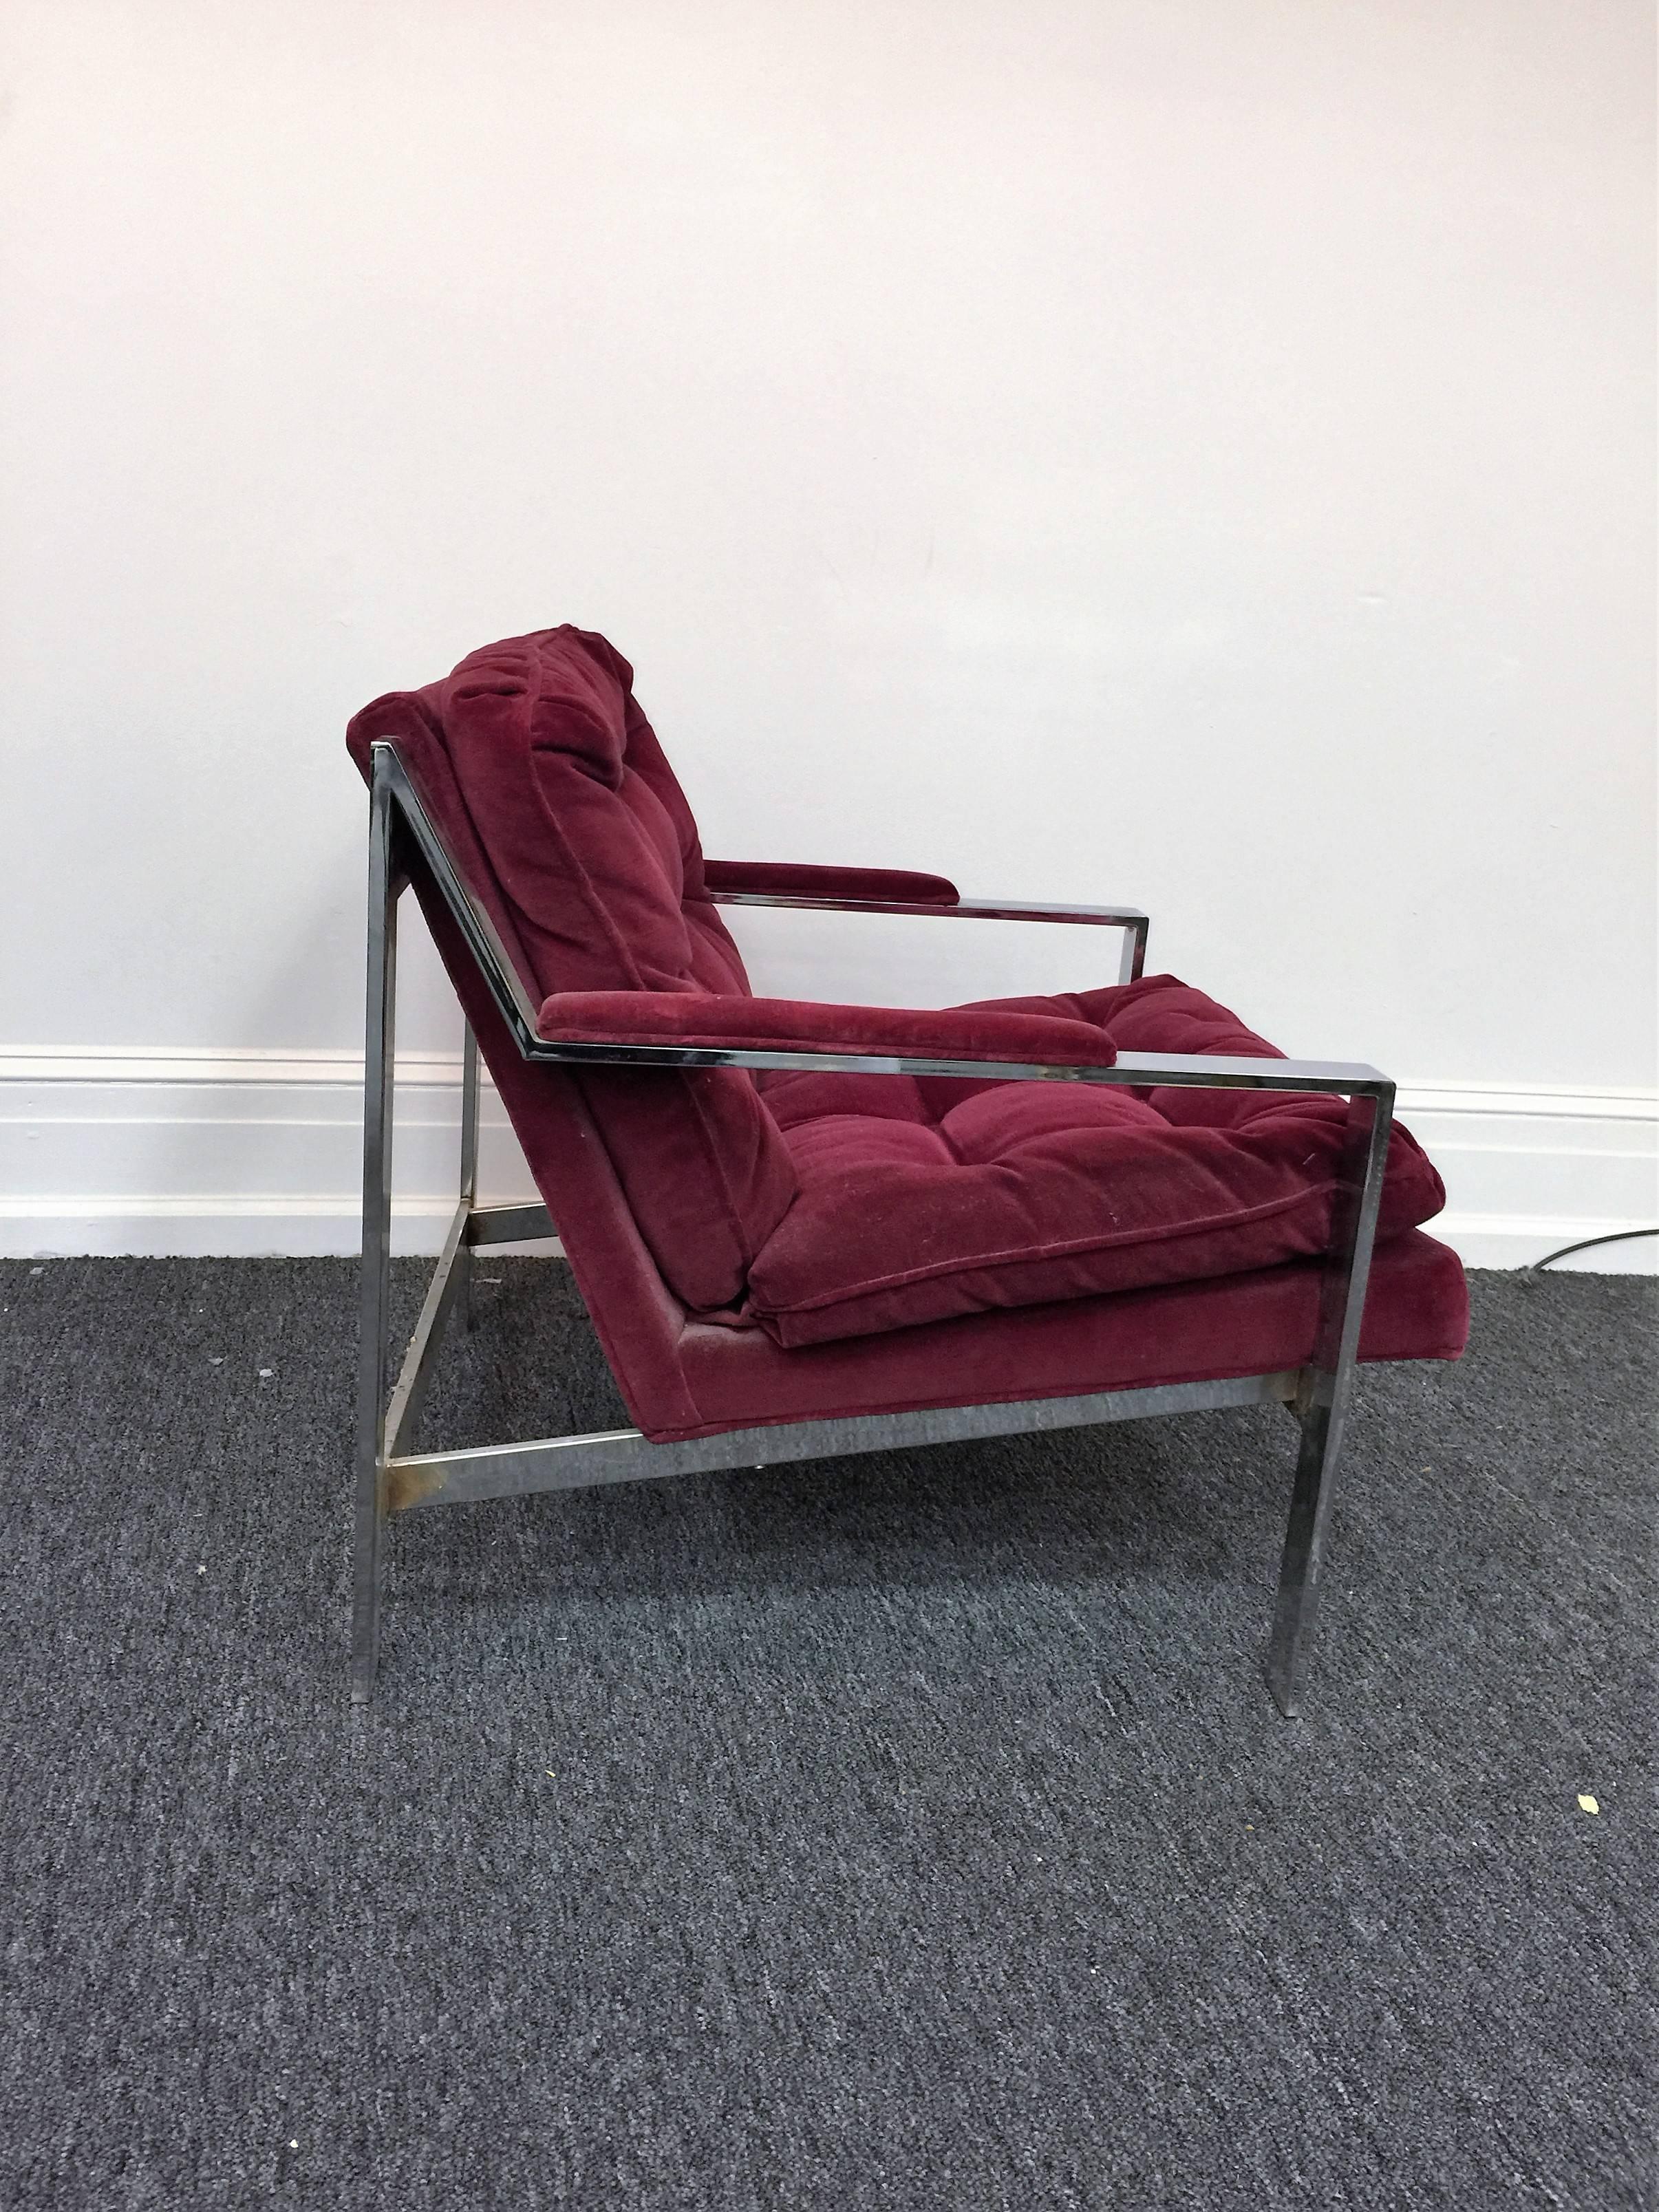 Great 1970s chromed flat band steel armchair with original Burgundy velvet upholstery. Nice addition for your modern interior. The chrome is in perfect condition there is some packing tape on the back bottom chrome band, that looks like chrome